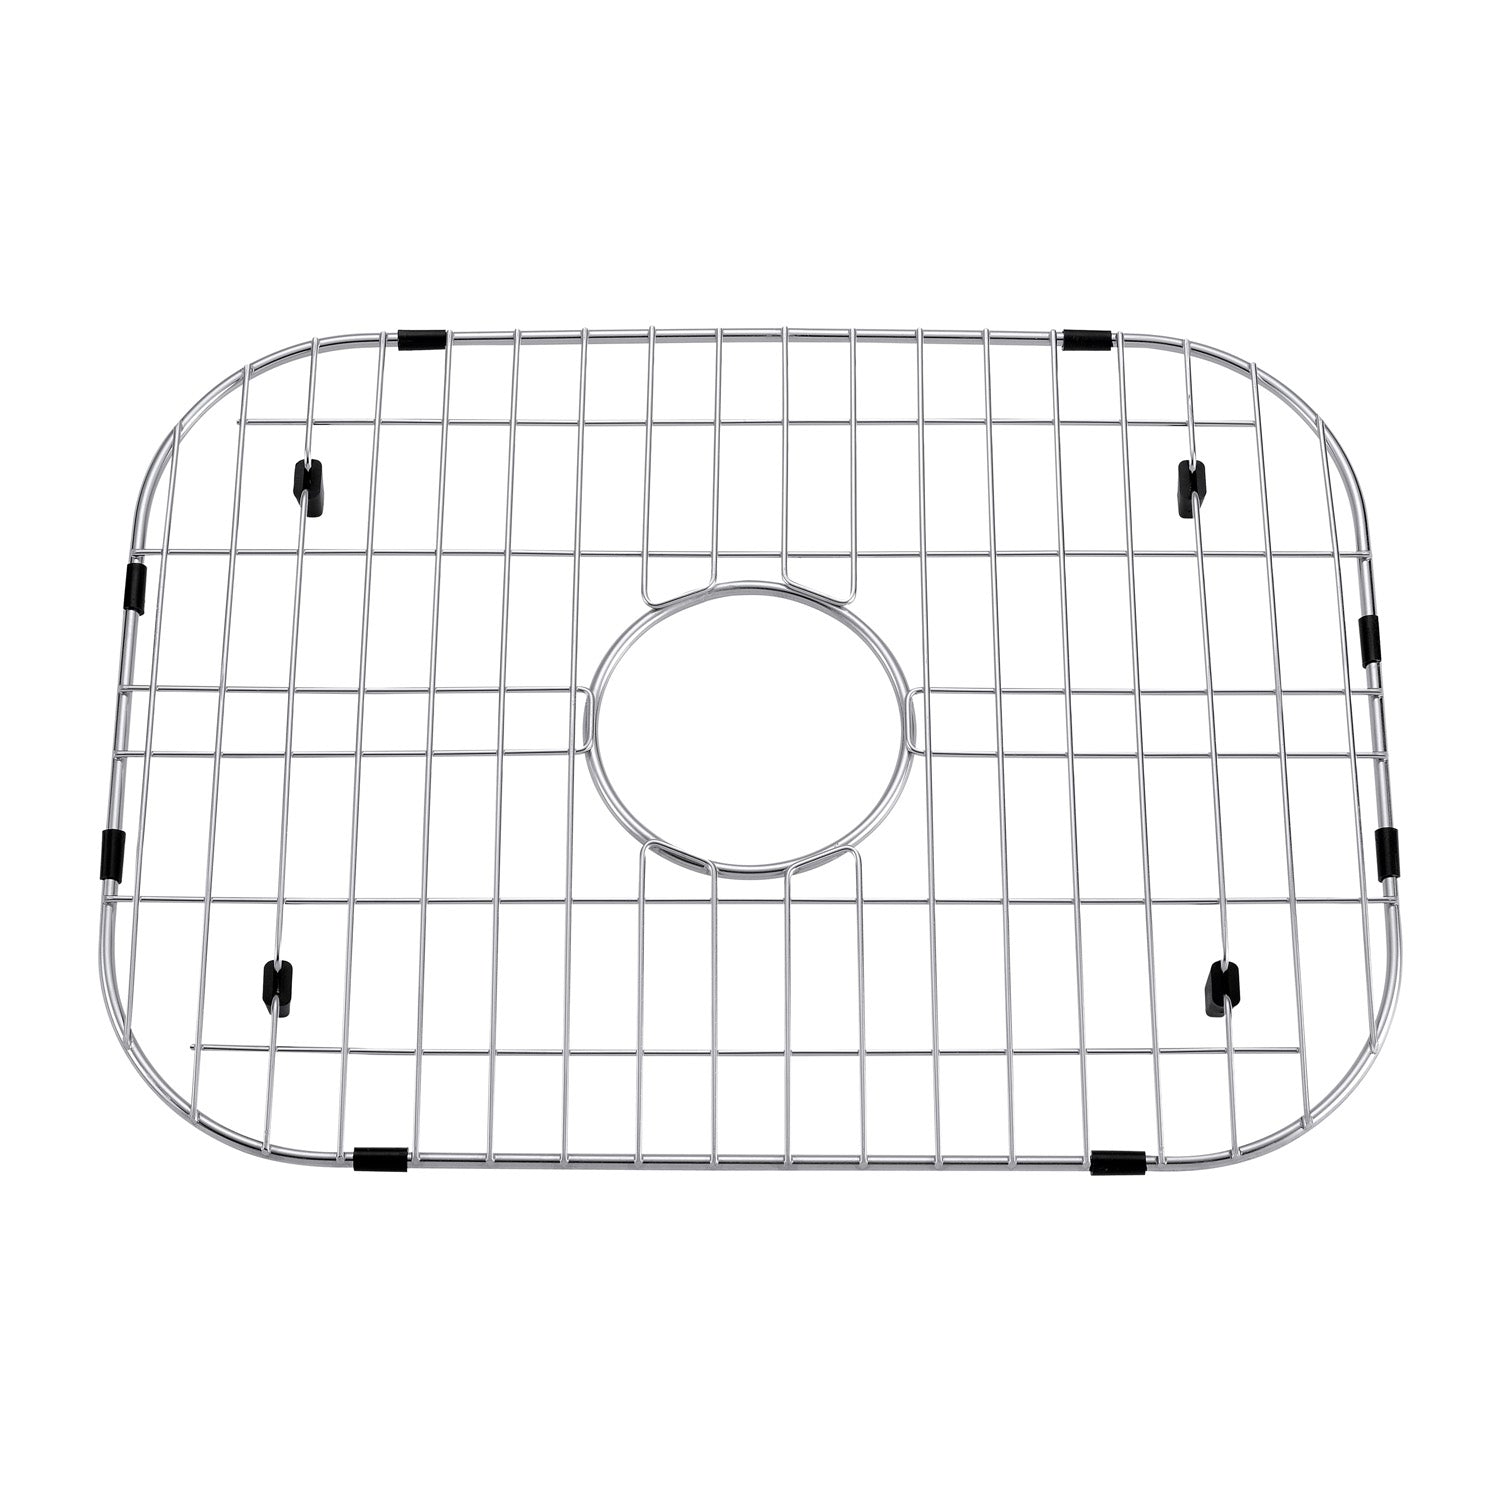 DAX Grid for Kitchen Sink, Stainless Steel Body, Chrome Finish, Compatible with DAX-OM2522, 19-1/2 x 15-1/4 Inches (GRID-OM2522)